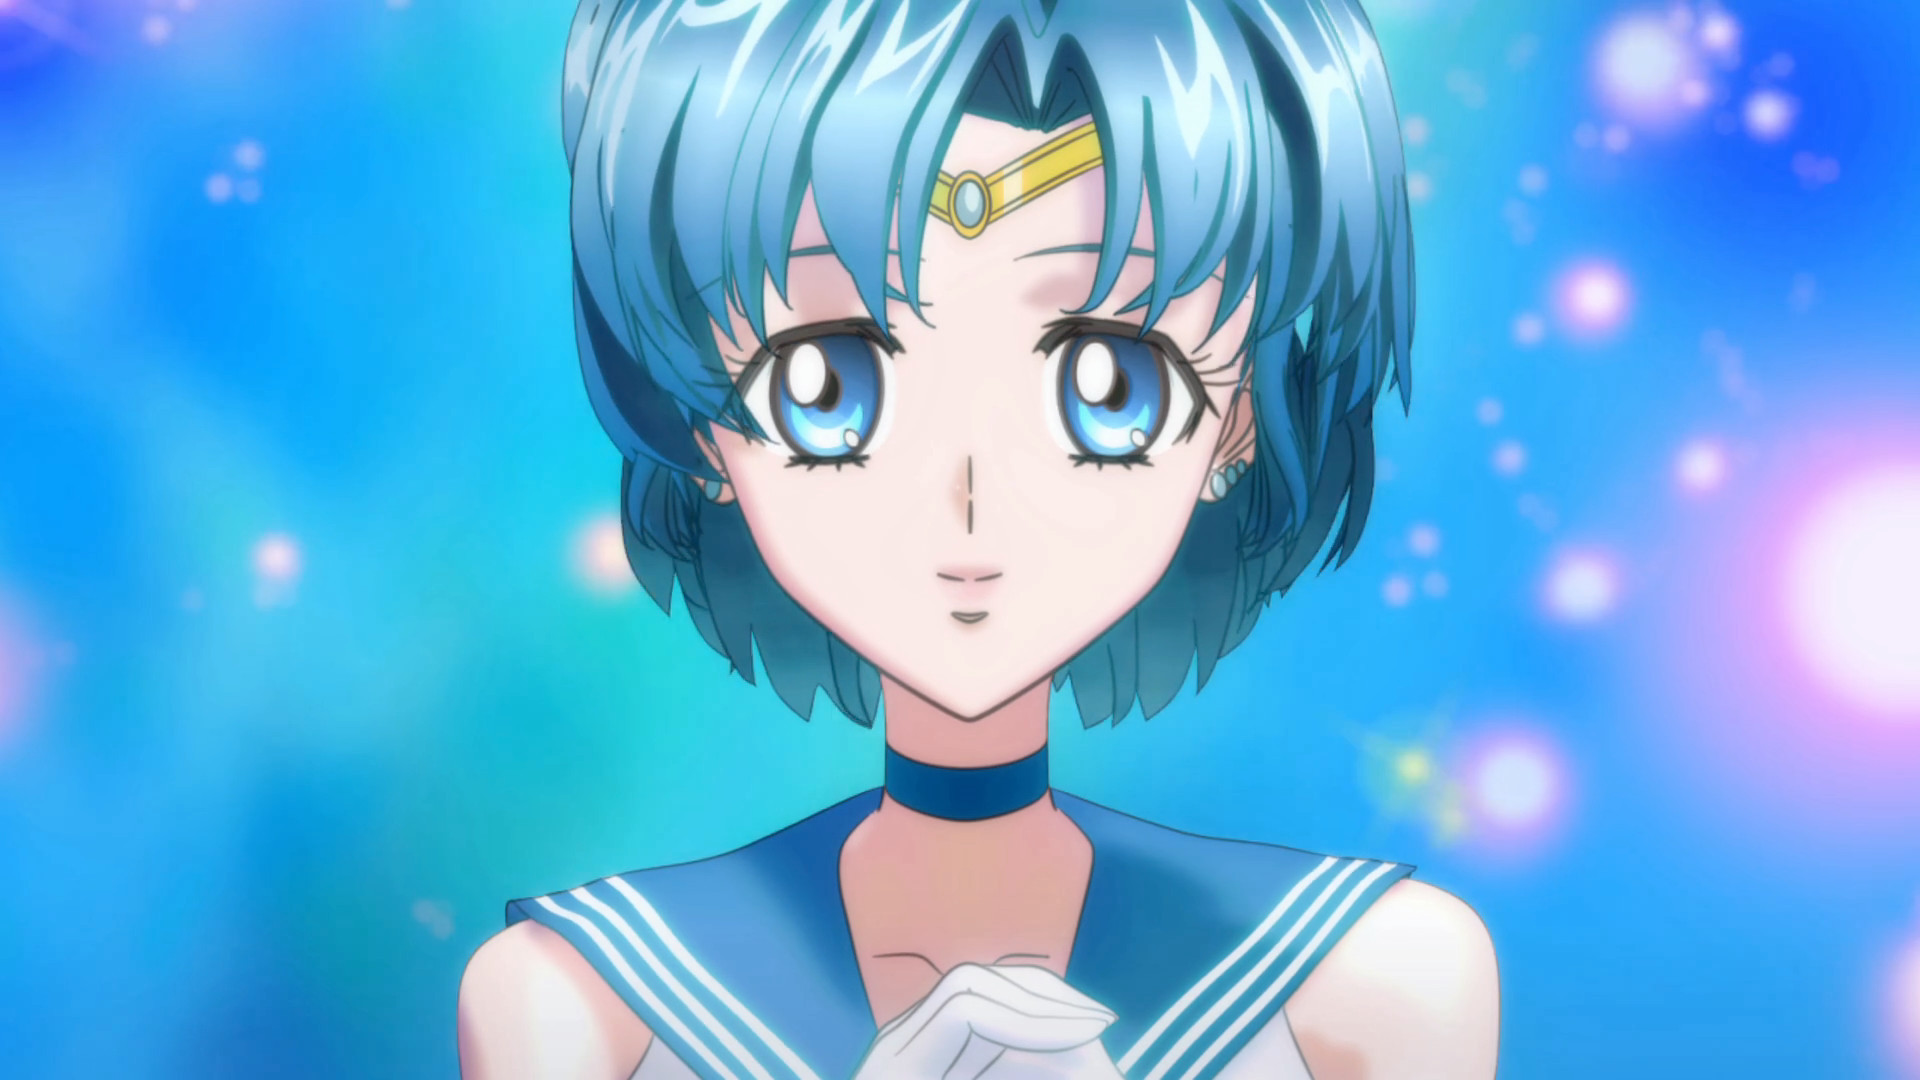 1920x1080 Agent of love and exams, the pretty sailor suited solider Sailor Mercury!